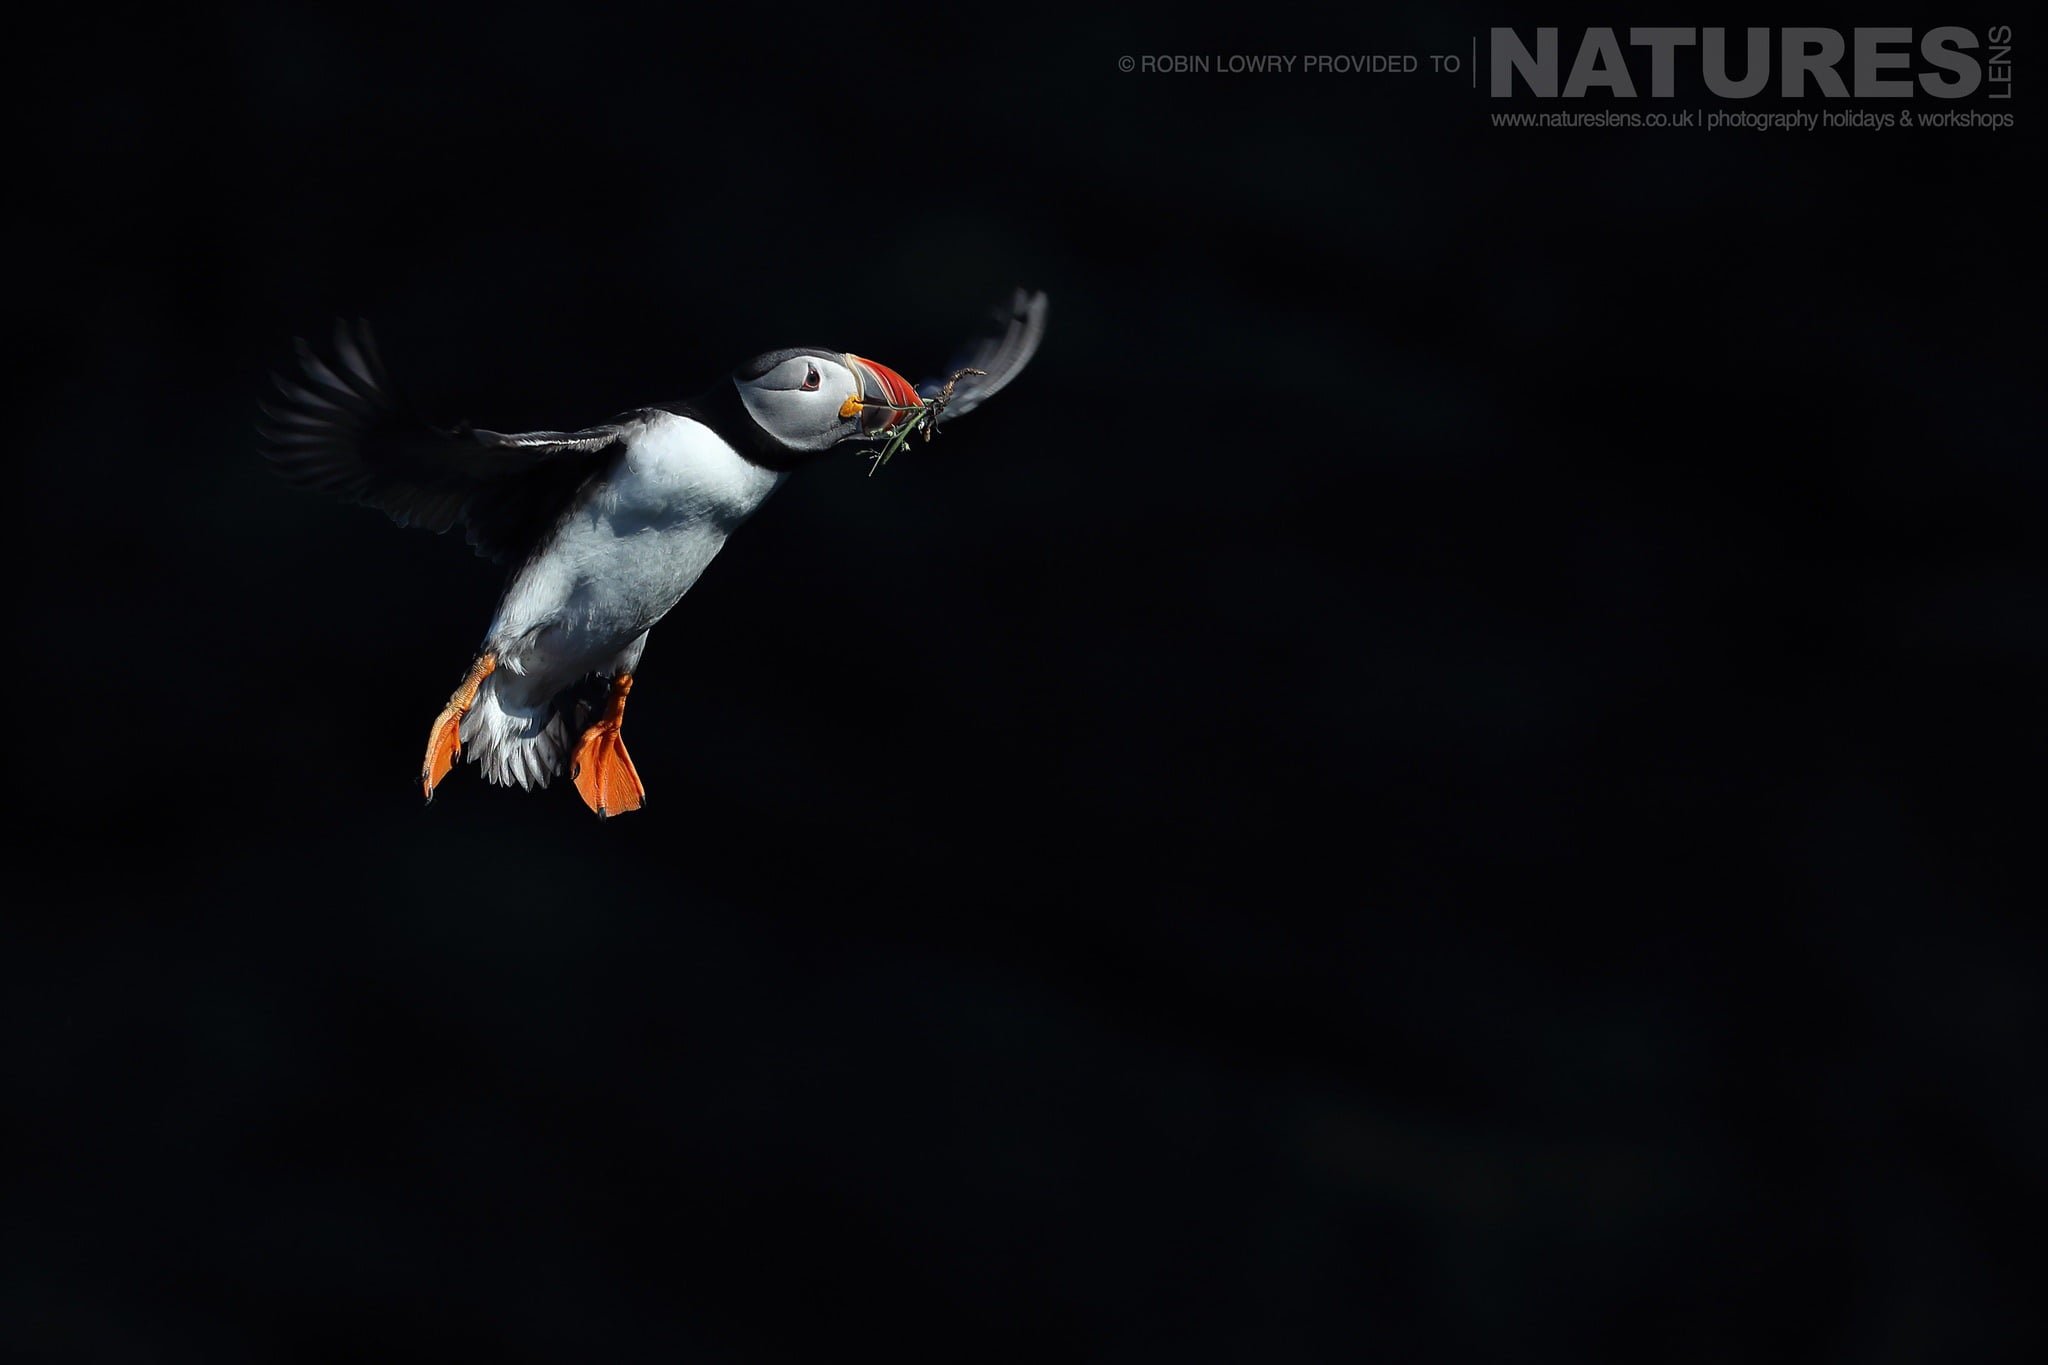 A group of the Puffins of Fair Isle - this image was captured during the NaturesLens Atlantic Puffins of Fair Isle photography holiday